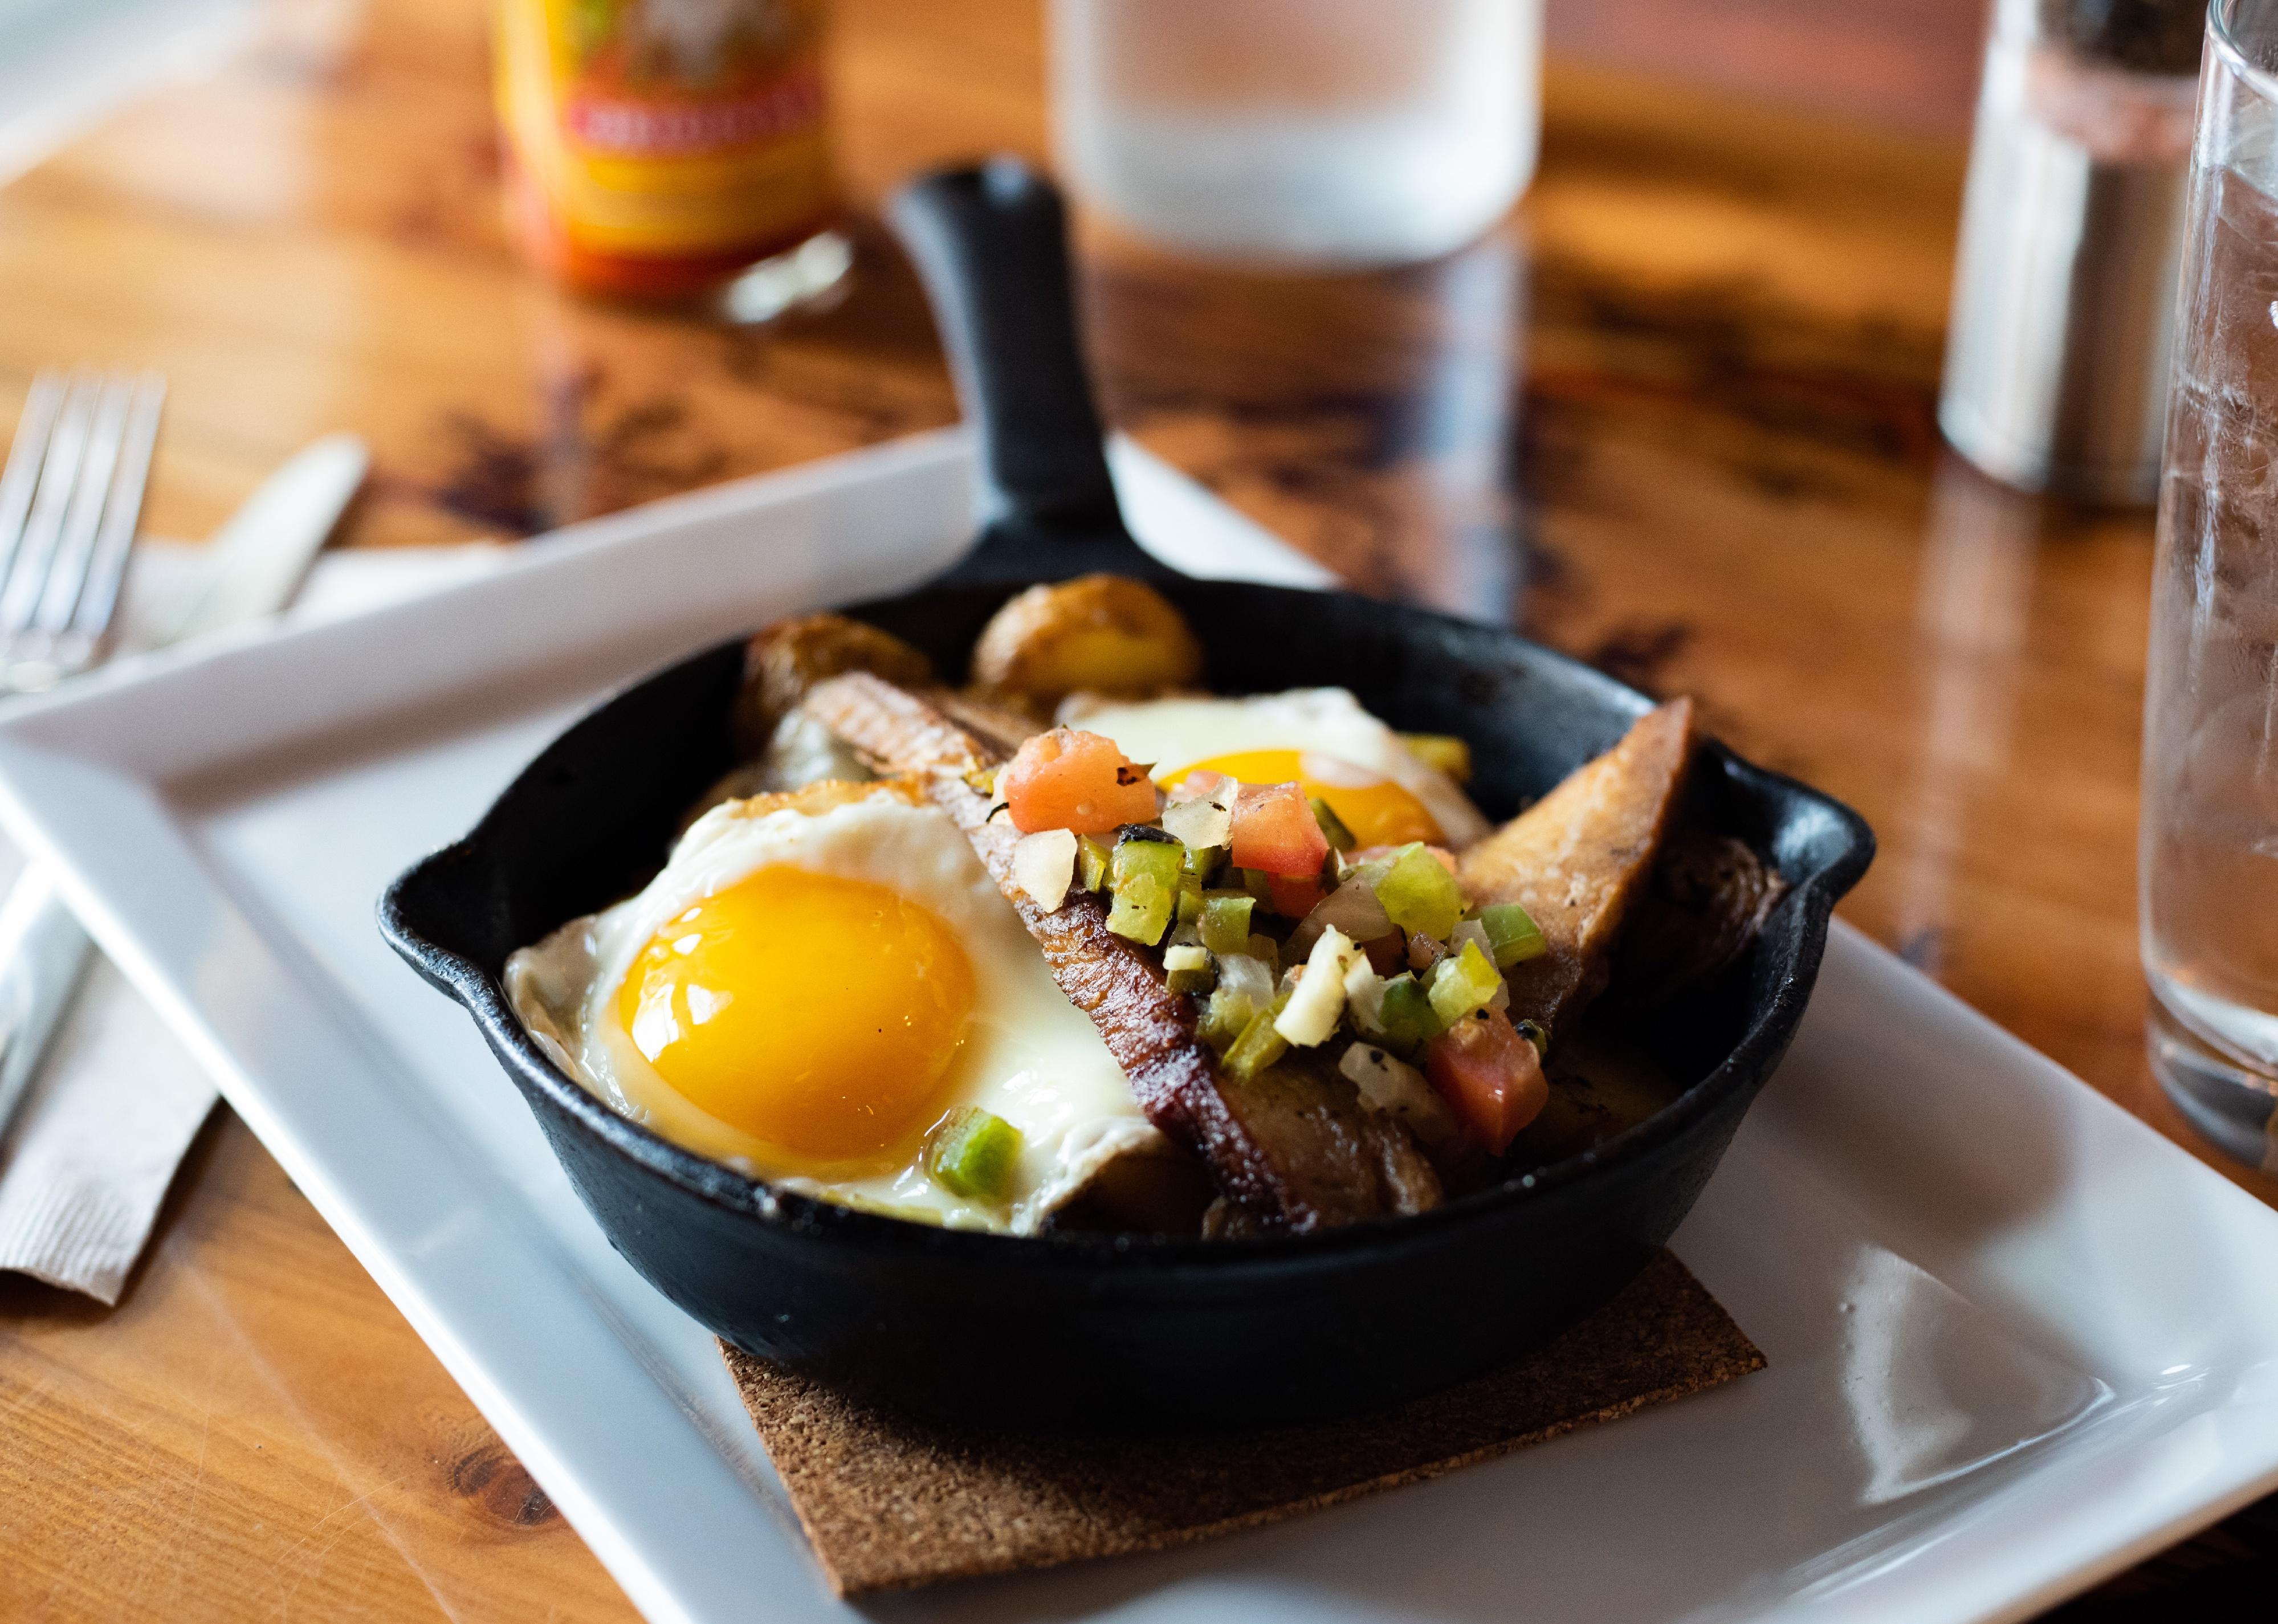 Highestrated Brunch Restaurants in Portland, Maine, According to